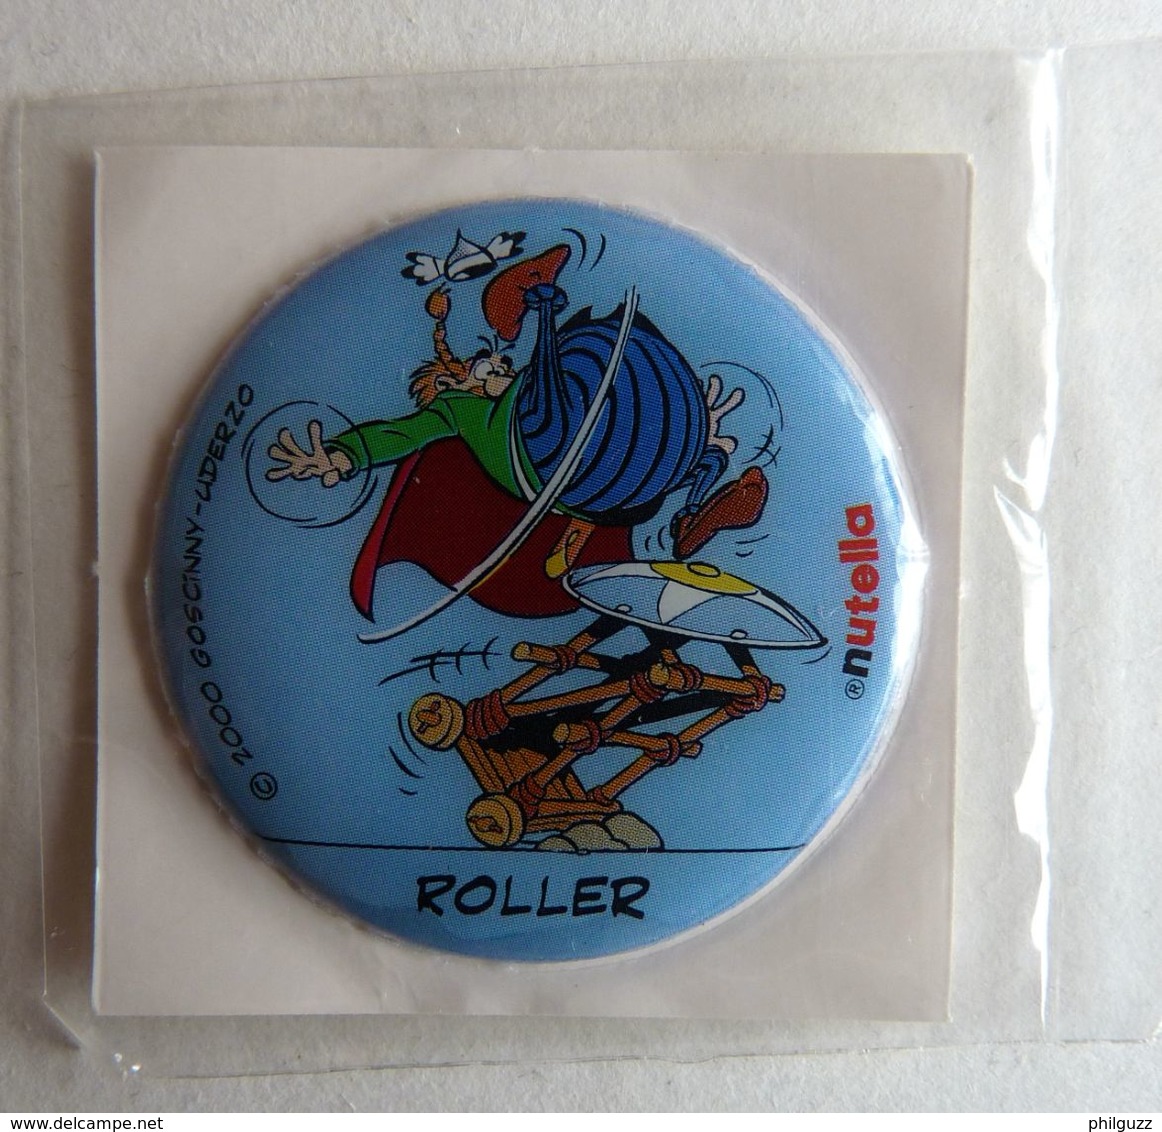 AUTOCOLLANT ASTERIX  Mousse - 2000 - NUTELLA - ROLLER -  (1  & 2) - Stickers